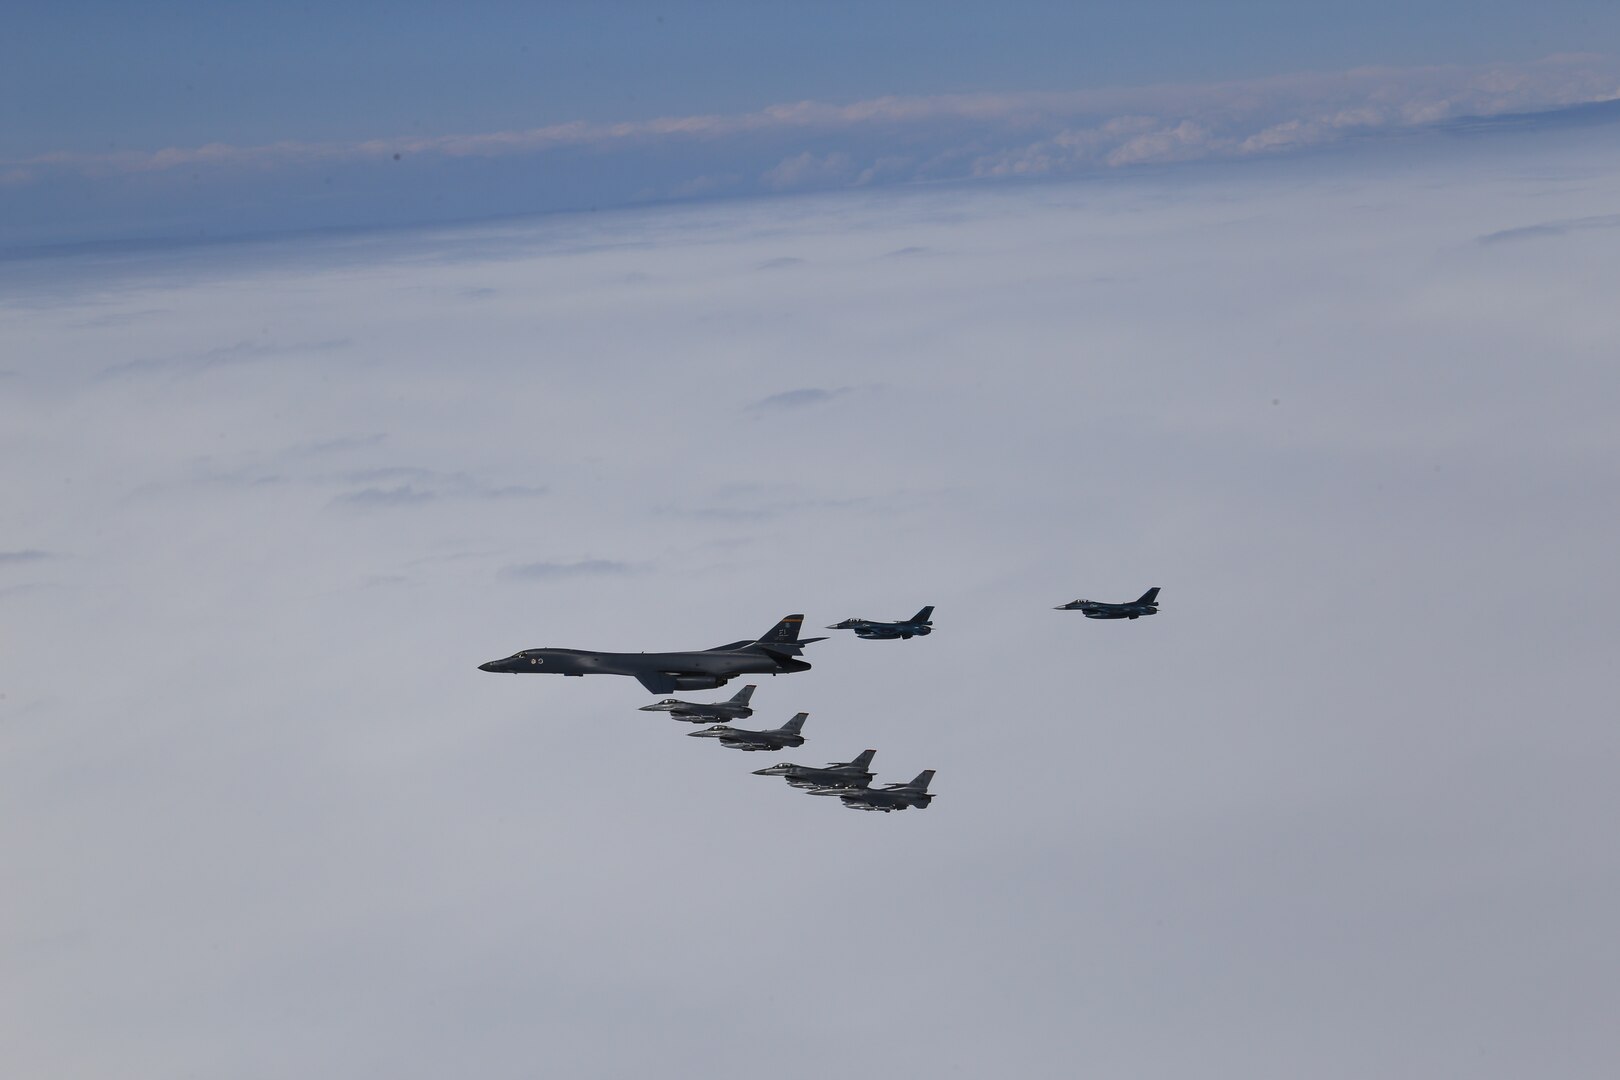 A U.S. Air Force B-1B Lancer from Ellsworth Air Force Base, S.D. and F-16 Fighting Falcons from Misawa Air Base, Japan, conducted bilateral joint training with Japan Air Self-Defense Force (JASDF) F-2s and F-15s off the coast of Northern Japan, April 22, 2020. U.S. Strategic Command's bomber forces regularly conduct combined theater security cooperation engagements with allies and partners, demonstrating U.S. capability to command, control and conduct bomber missions around the world. (Courtesy photo by the Japan Air-Self Defense Force)